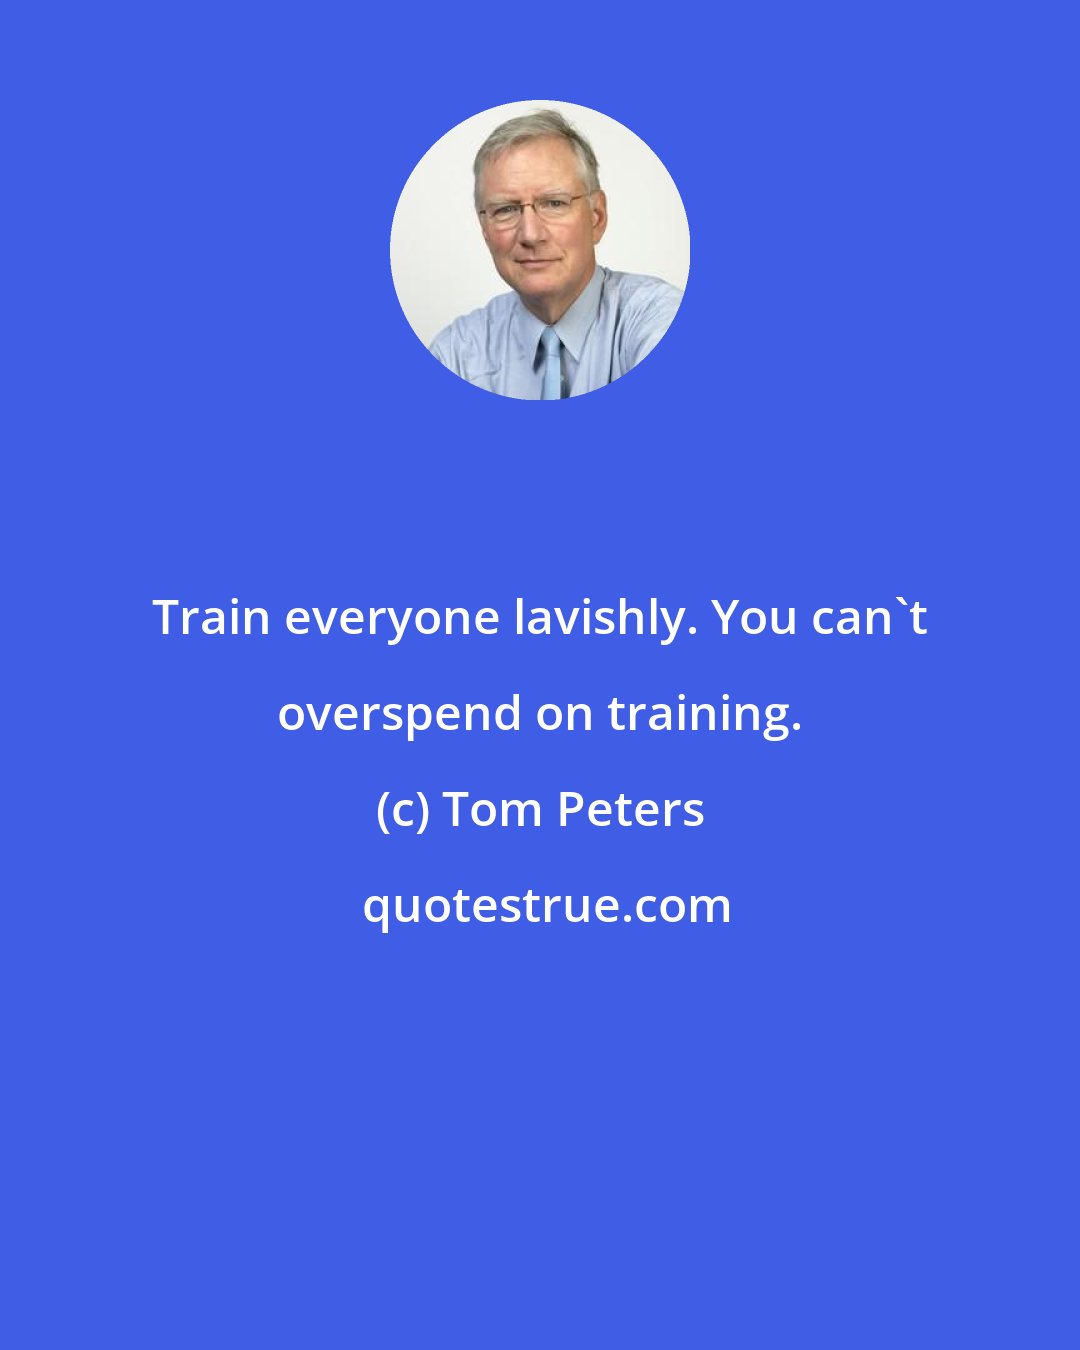 Tom Peters: Train everyone lavishly. You can't overspend on training.